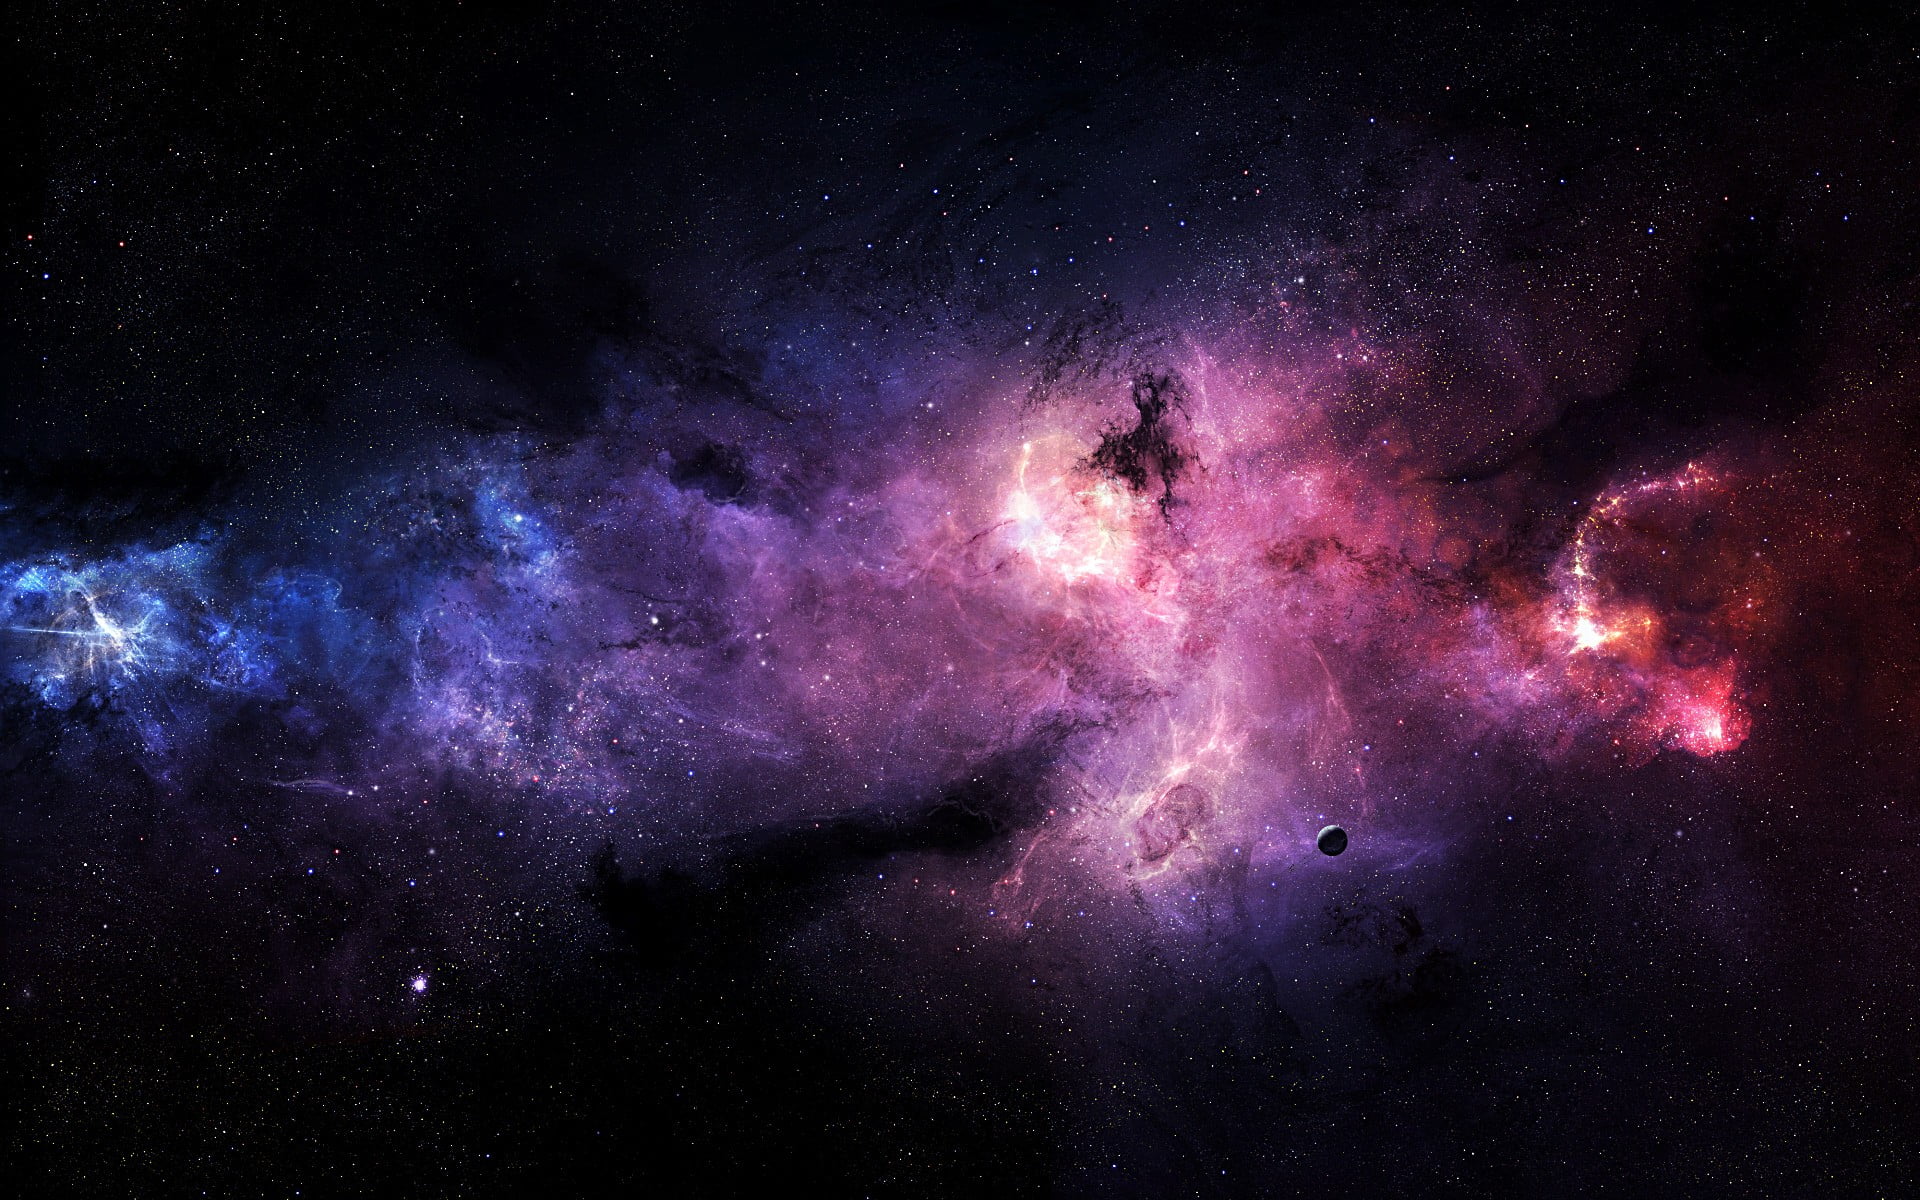 outer space, space art, digital art, night, astronomy, galaxy